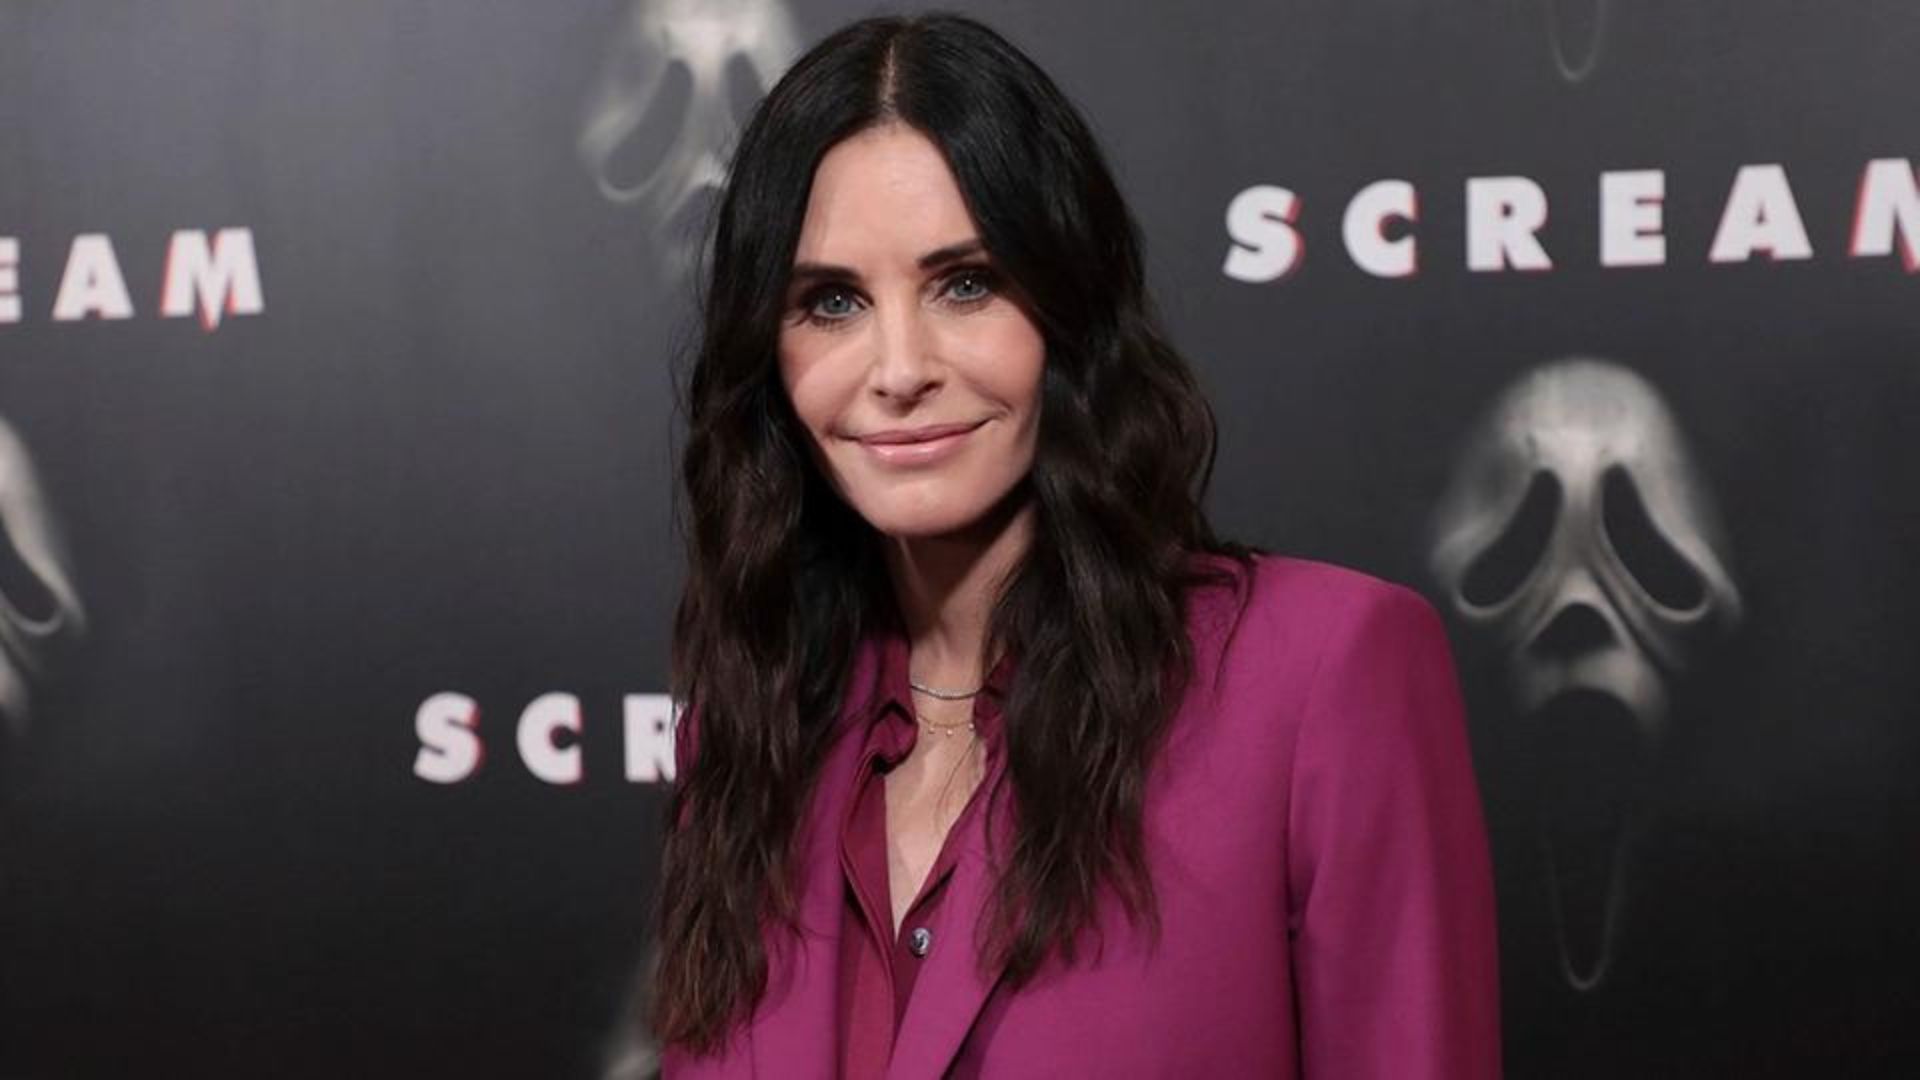 Courteney Cox Smiling And Black Poster On Background